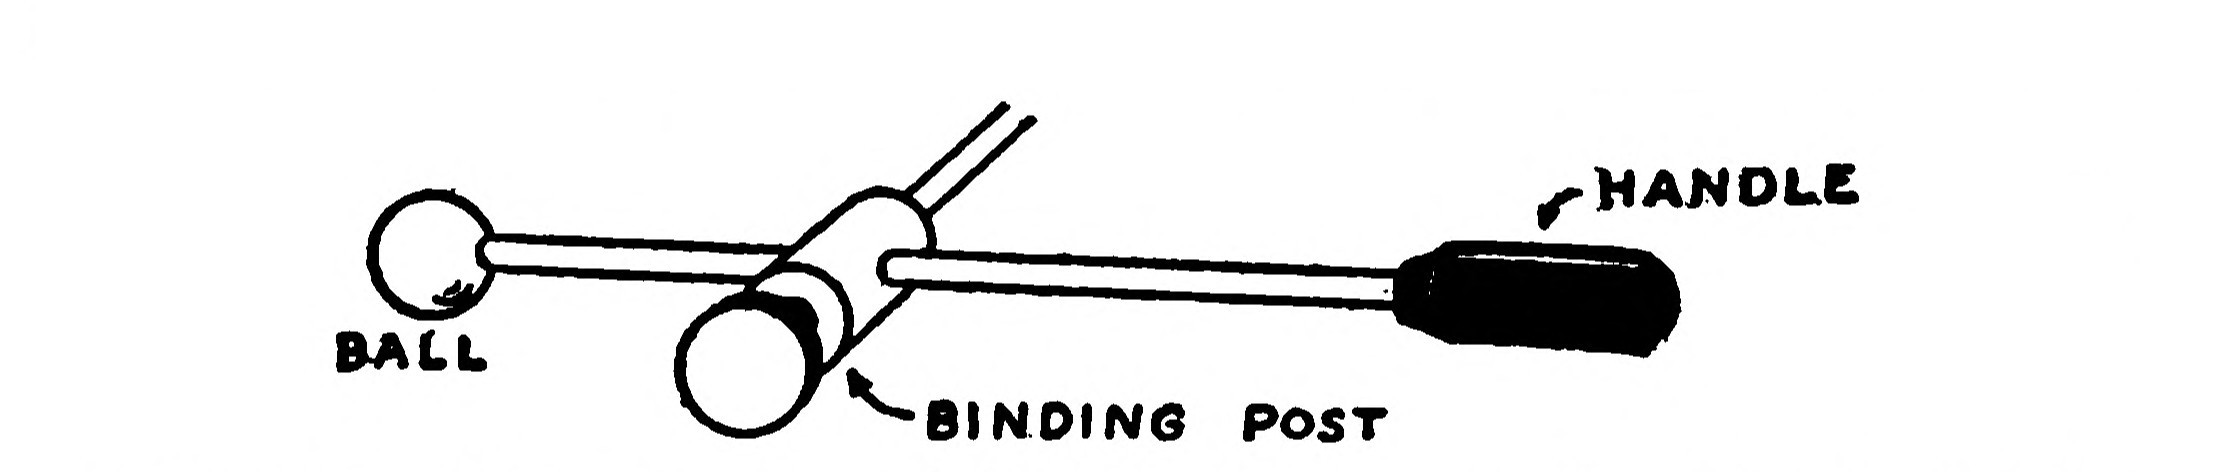 FIG. 11.—Showing how Binding Posts may be substituted for Round Balls on the Collector Rods.